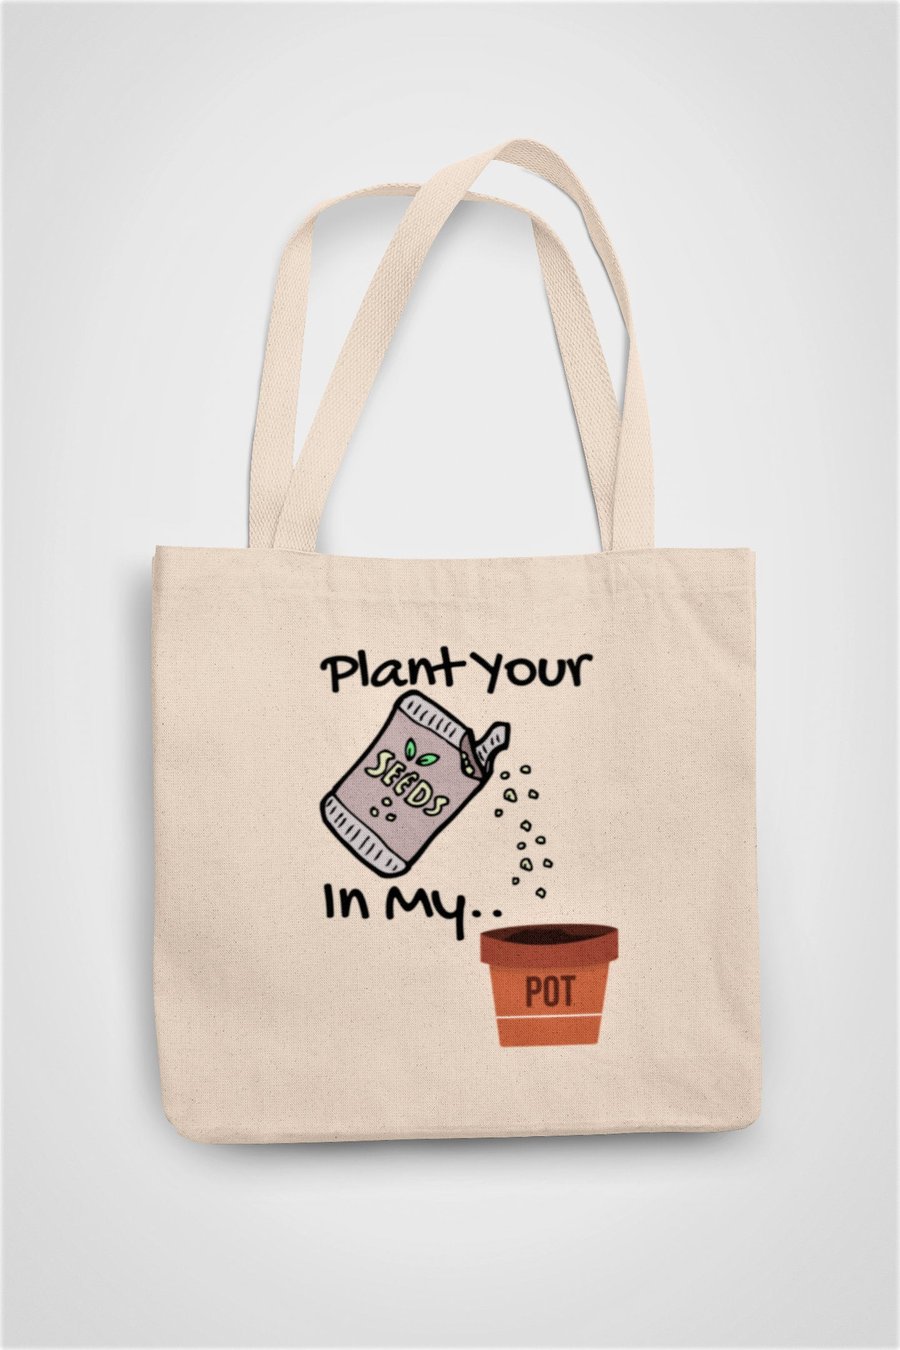 Plant your seeds in my Pot Outdoor Garden Tote  - Folksy